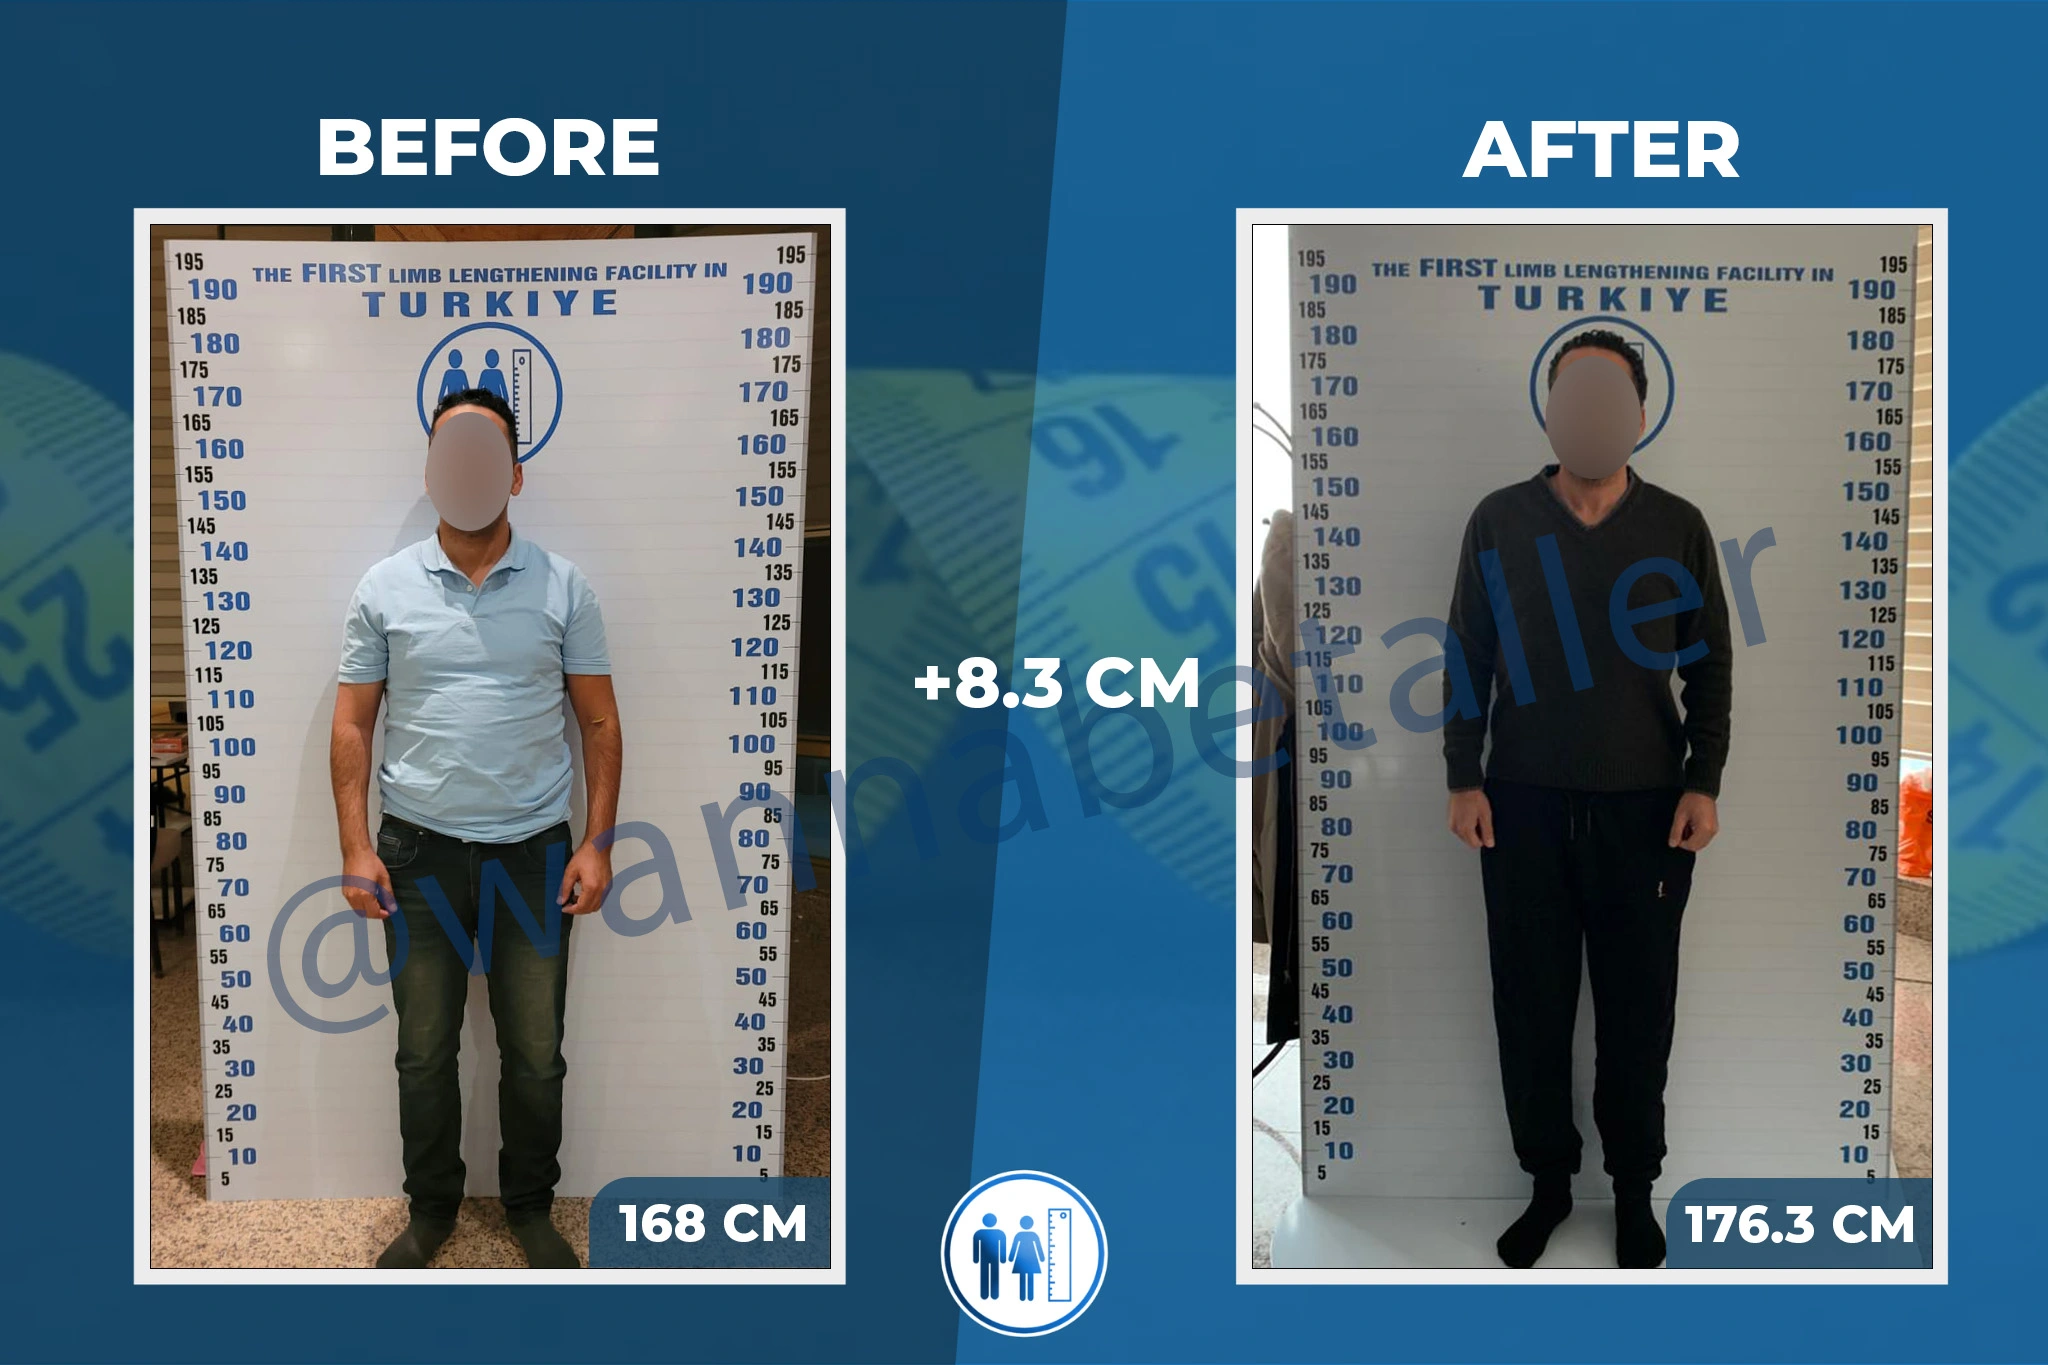 limb-lengthening-surgery-before-after-15 (2)